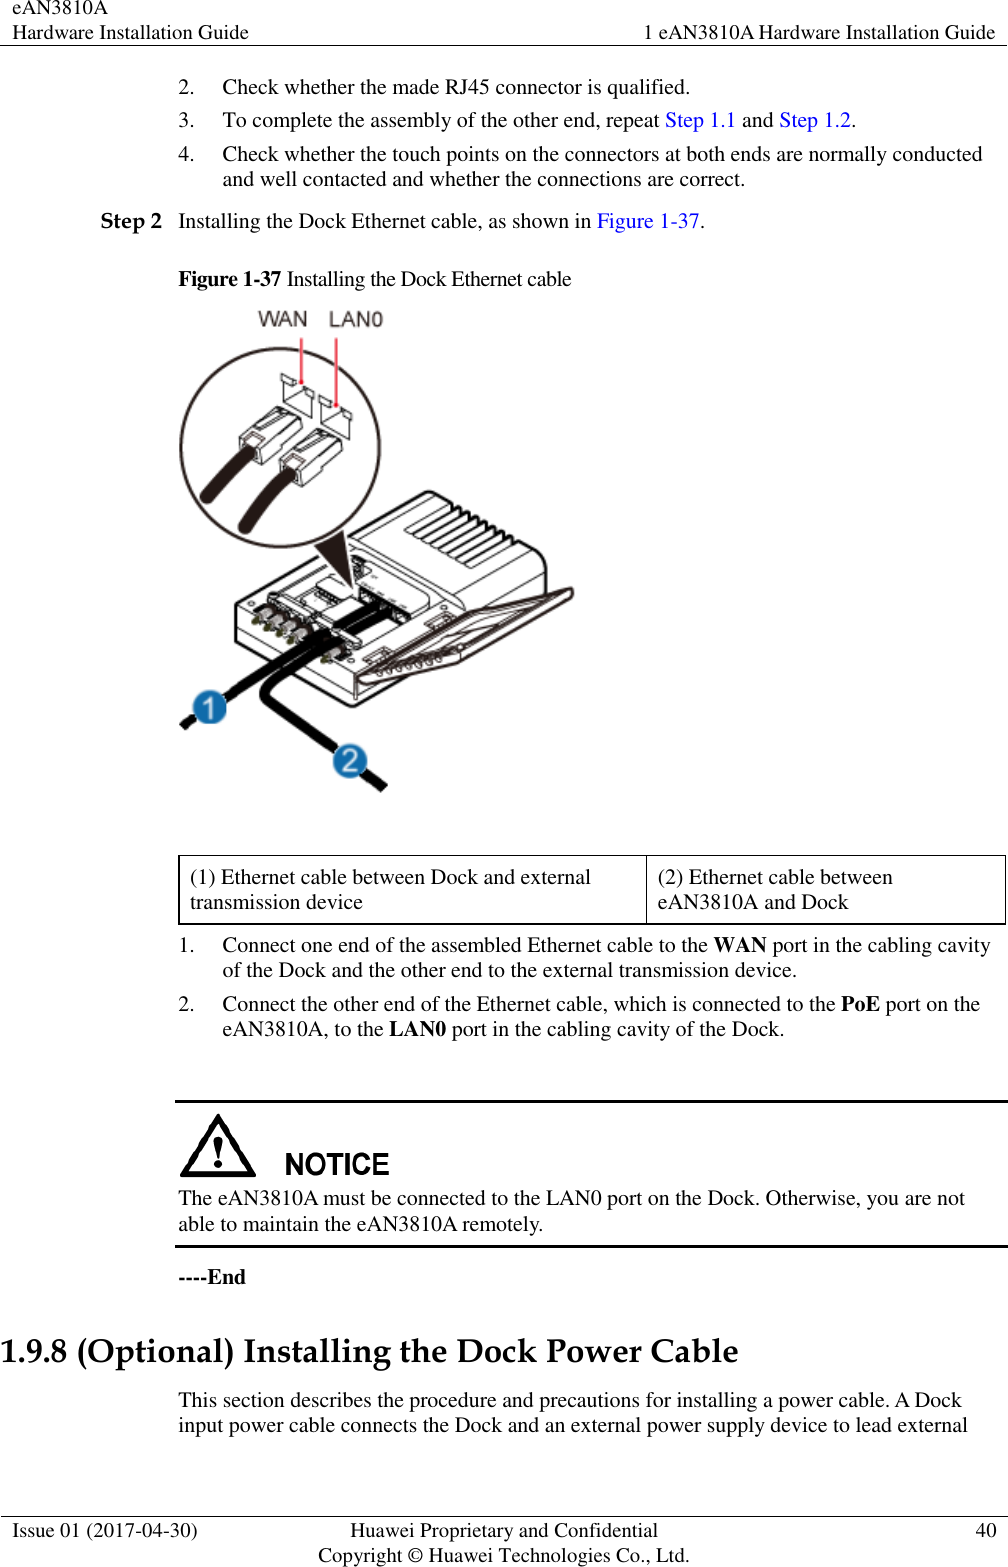 eAN3810A   Hardware Installation Guide 1 eAN3810A Hardware Installation Guide  Issue 01 (2017-04-30) Huawei Proprietary and Confidential                                     Copyright © Huawei Technologies Co., Ltd. 40  2. Check whether the made RJ45 connector is qualified. 3. To complete the assembly of the other end, repeat Step 1.1 and Step 1.2. 4. Check whether the touch points on the connectors at both ends are normally conducted and well contacted and whether the connections are correct. Step 2 Installing the Dock Ethernet cable, as shown in Figure 1-37. Figure 1-37 Installing the Dock Ethernet cable   (1) Ethernet cable between Dock and external transmission device (2) Ethernet cable between eAN3810A and Dock 1. Connect one end of the assembled Ethernet cable to the WAN port in the cabling cavity of the Dock and the other end to the external transmission device.   2. Connect the other end of the Ethernet cable, which is connected to the PoE port on the eAN3810A, to the LAN0 port in the cabling cavity of the Dock.   The eAN3810A must be connected to the LAN0 port on the Dock. Otherwise, you are not able to maintain the eAN3810A remotely. ----End 1.9.8 (Optional) Installing the Dock Power Cable This section describes the procedure and precautions for installing a power cable. A Dock input power cable connects the Dock and an external power supply device to lead external 